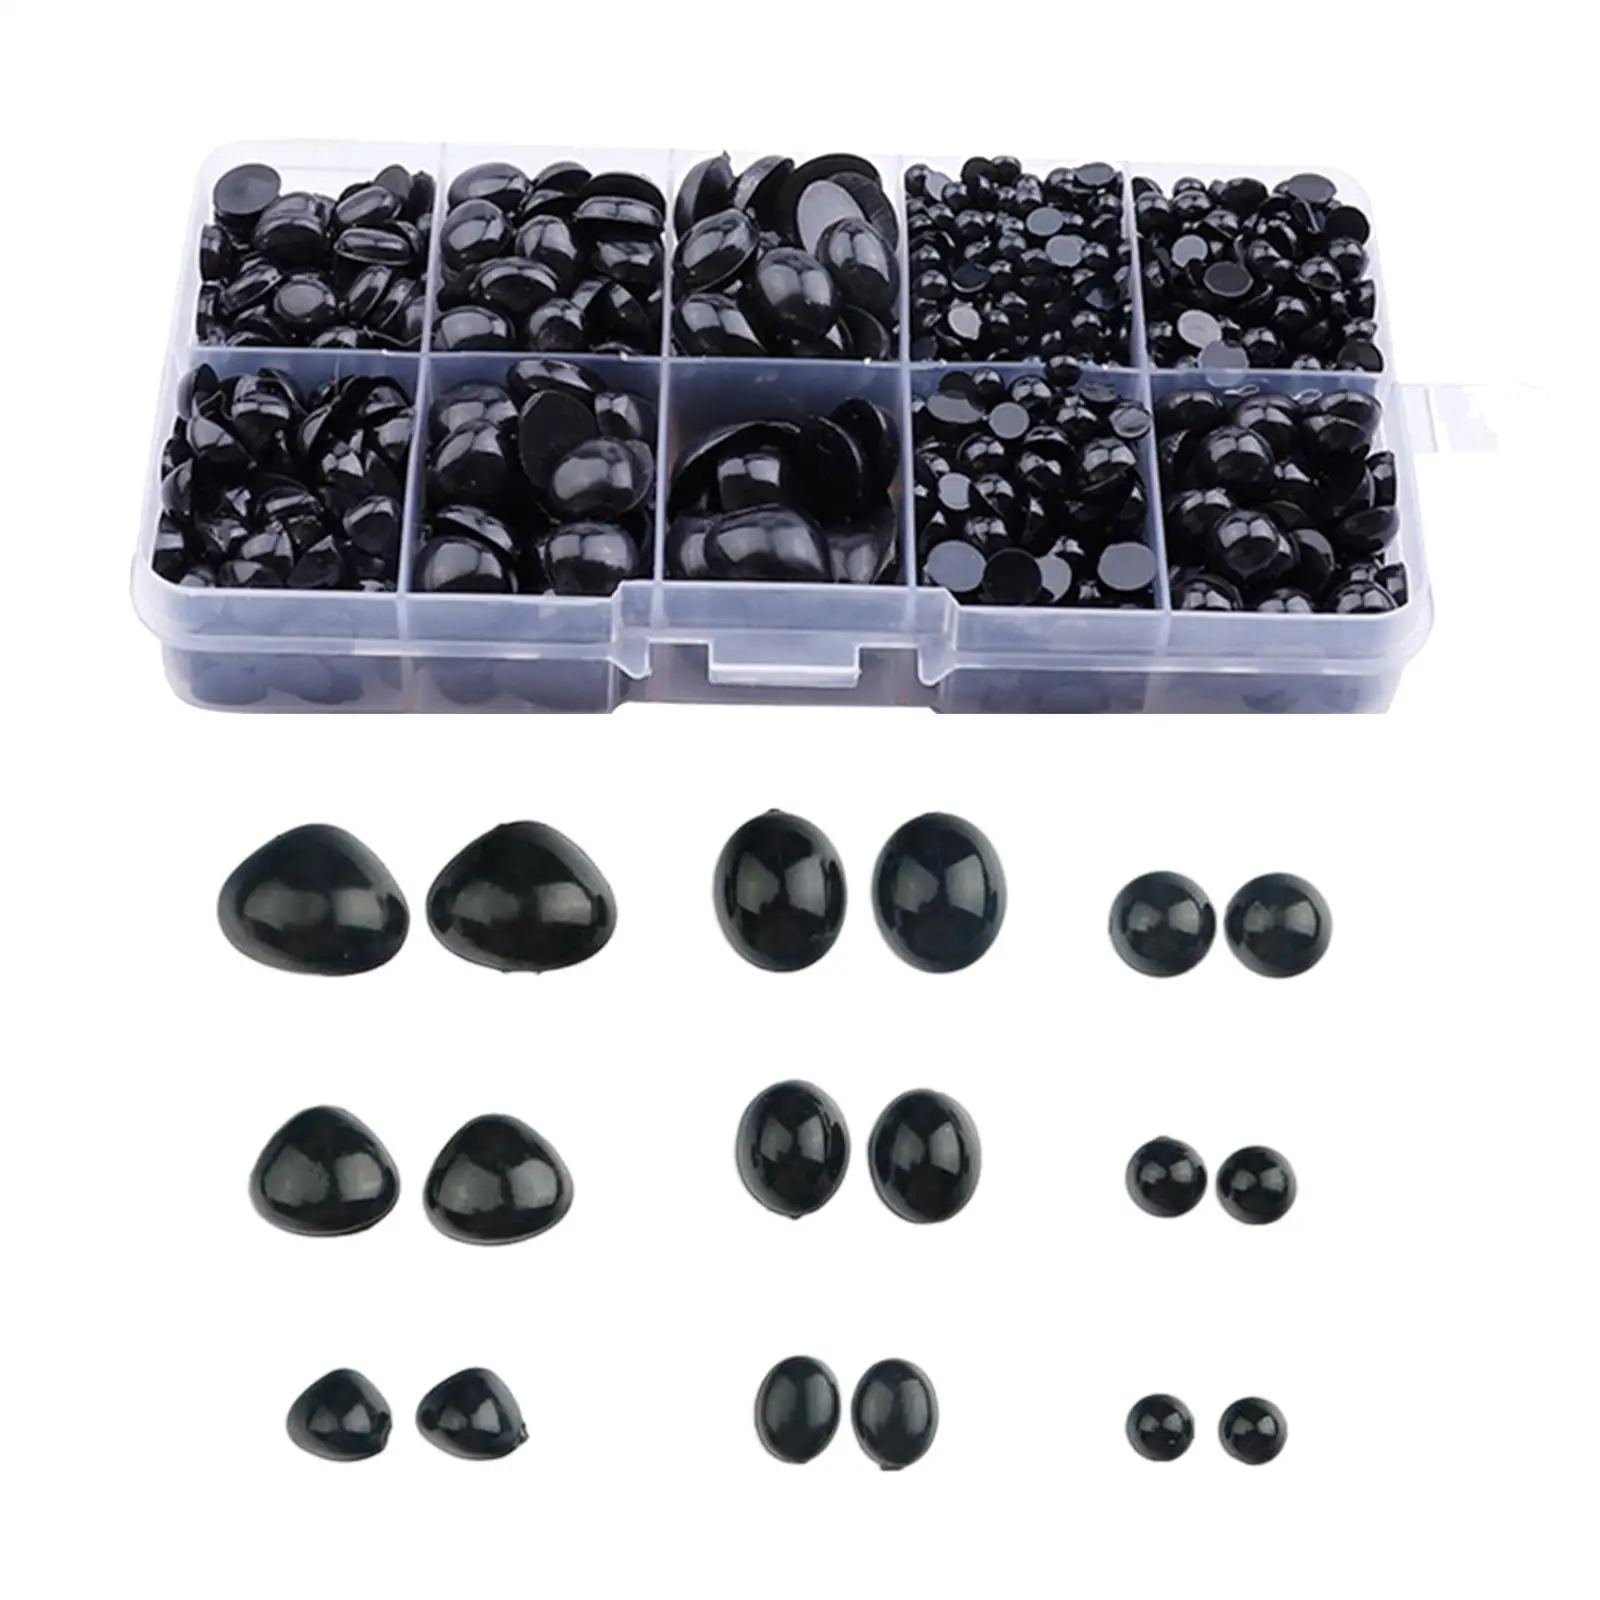 1000x Safety Black Eyes and Noses DIY Crafts Half Round Cabochons Flat Bottomed